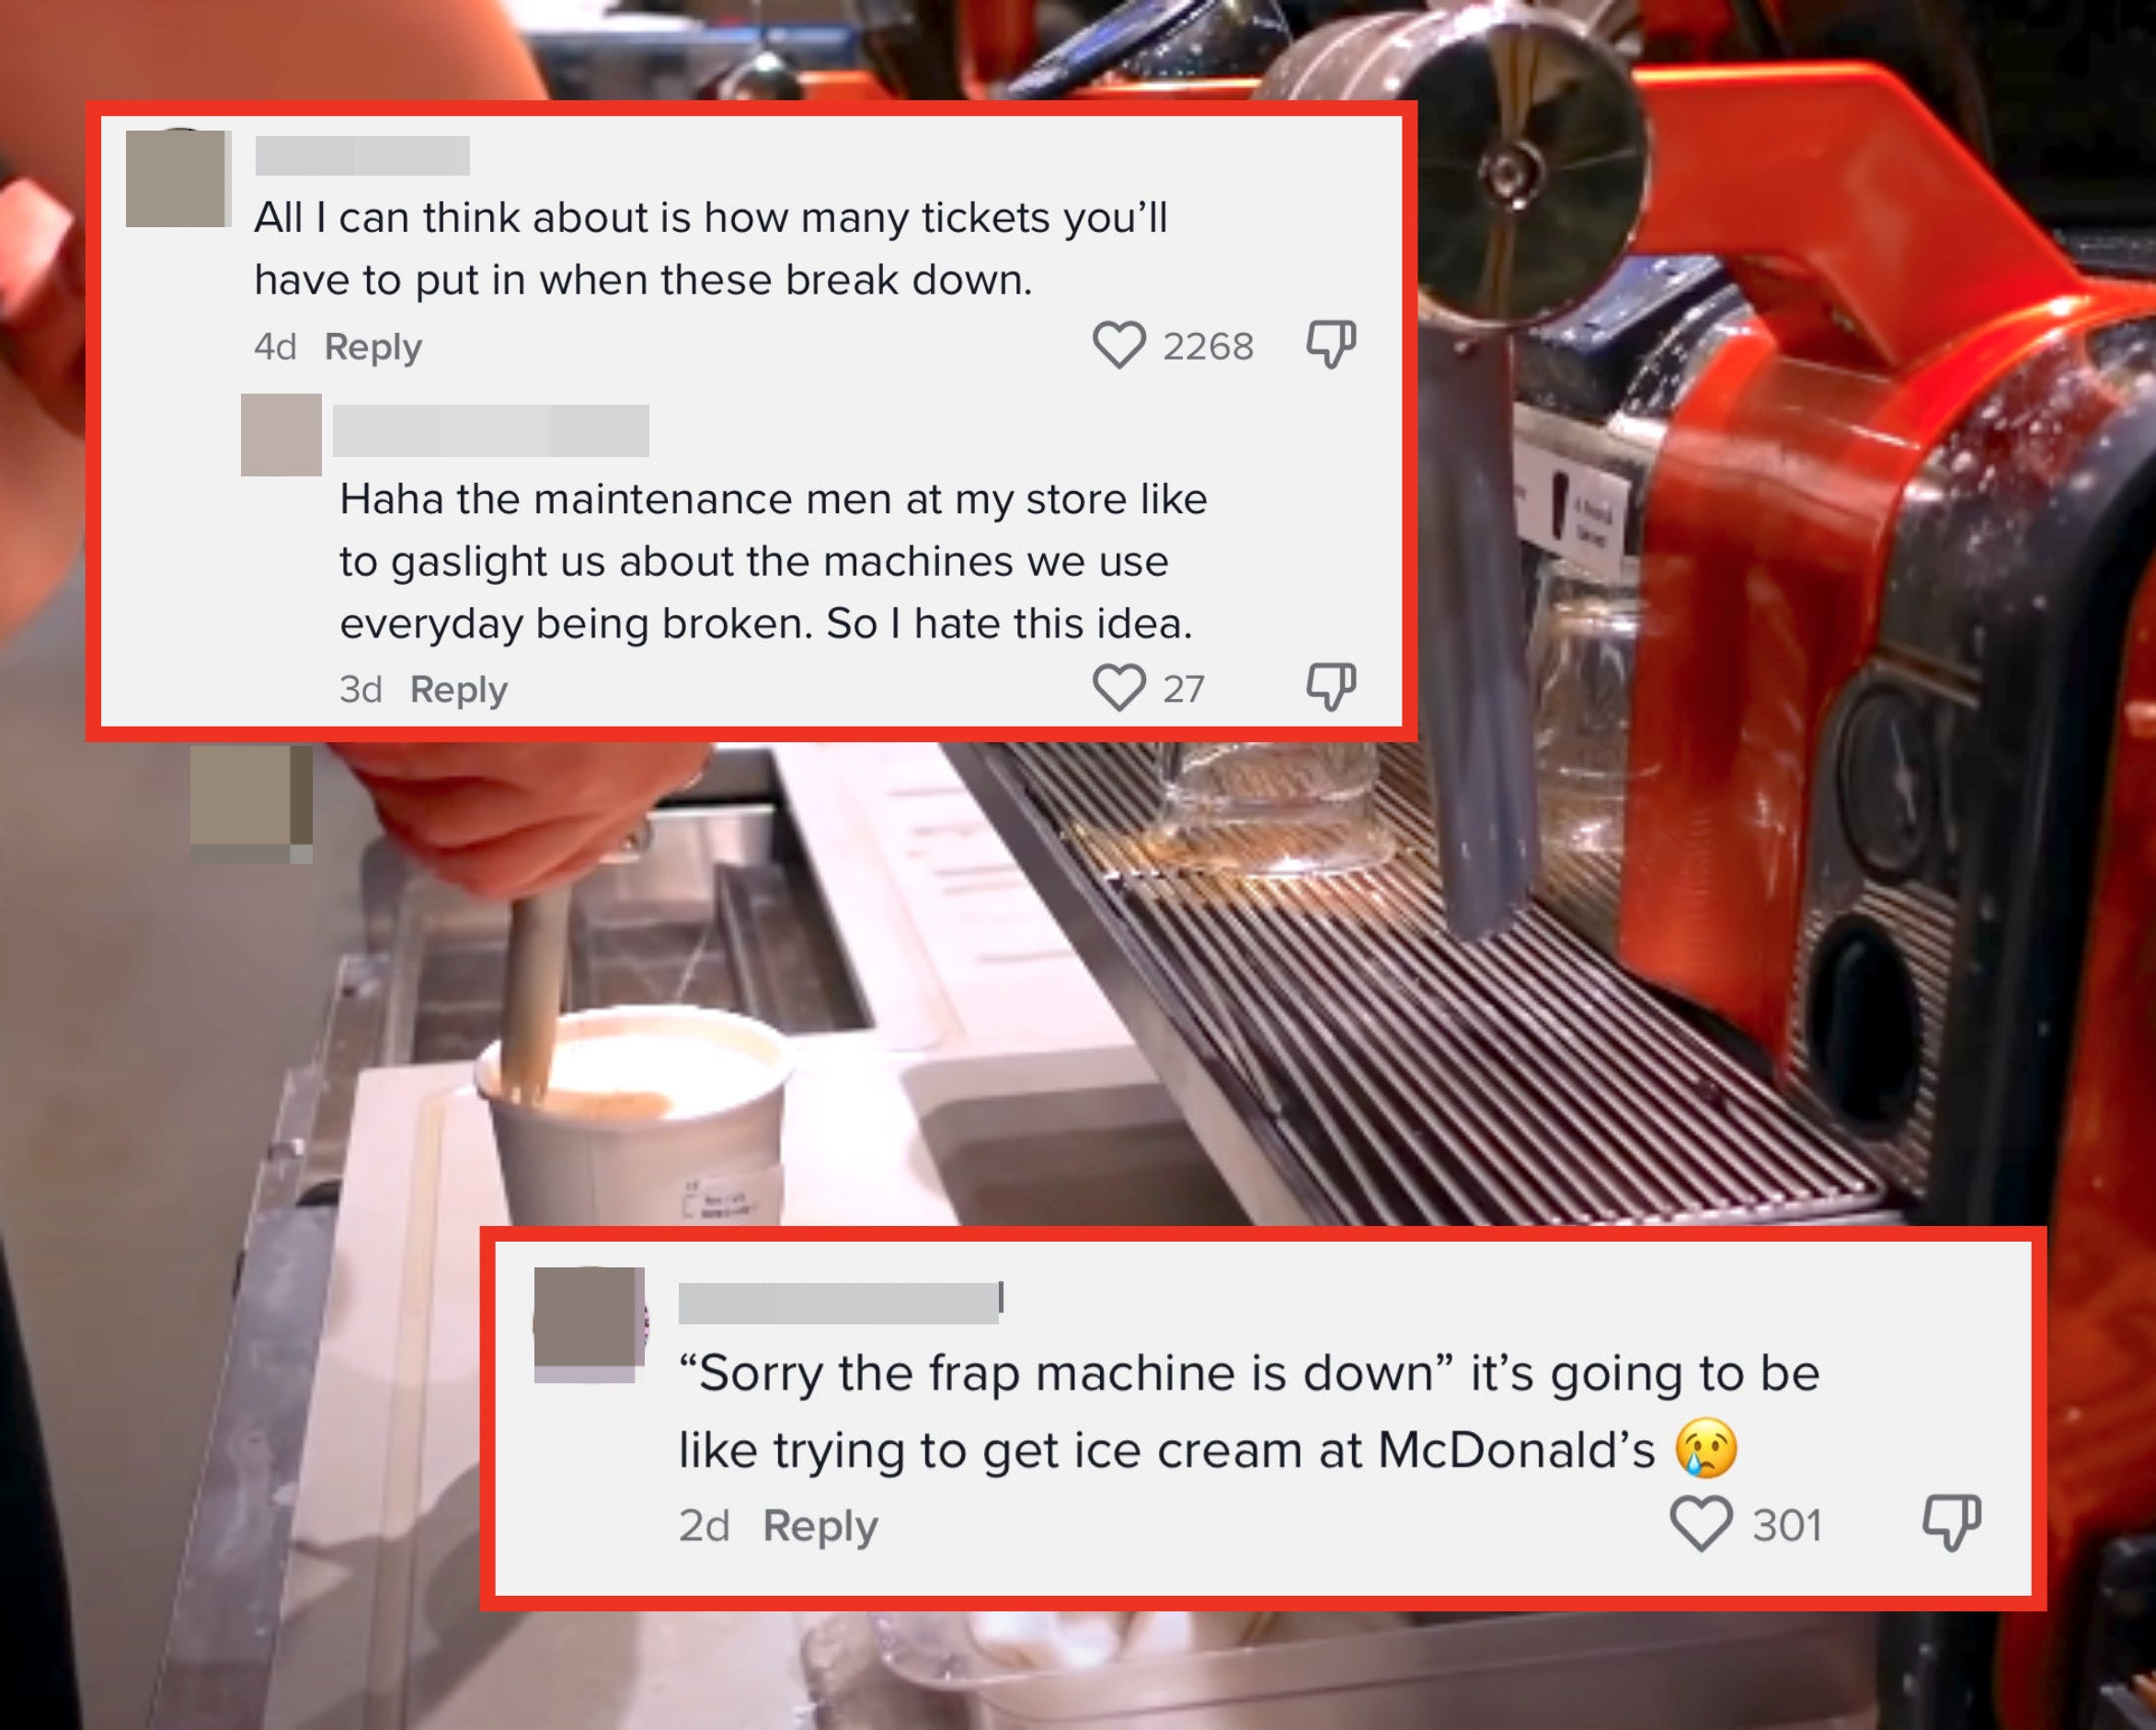 commenters saying that they&#x27;re worried about machines breaking down, and that getting a frap will be as difficult as getting ice cream at mcdonalds